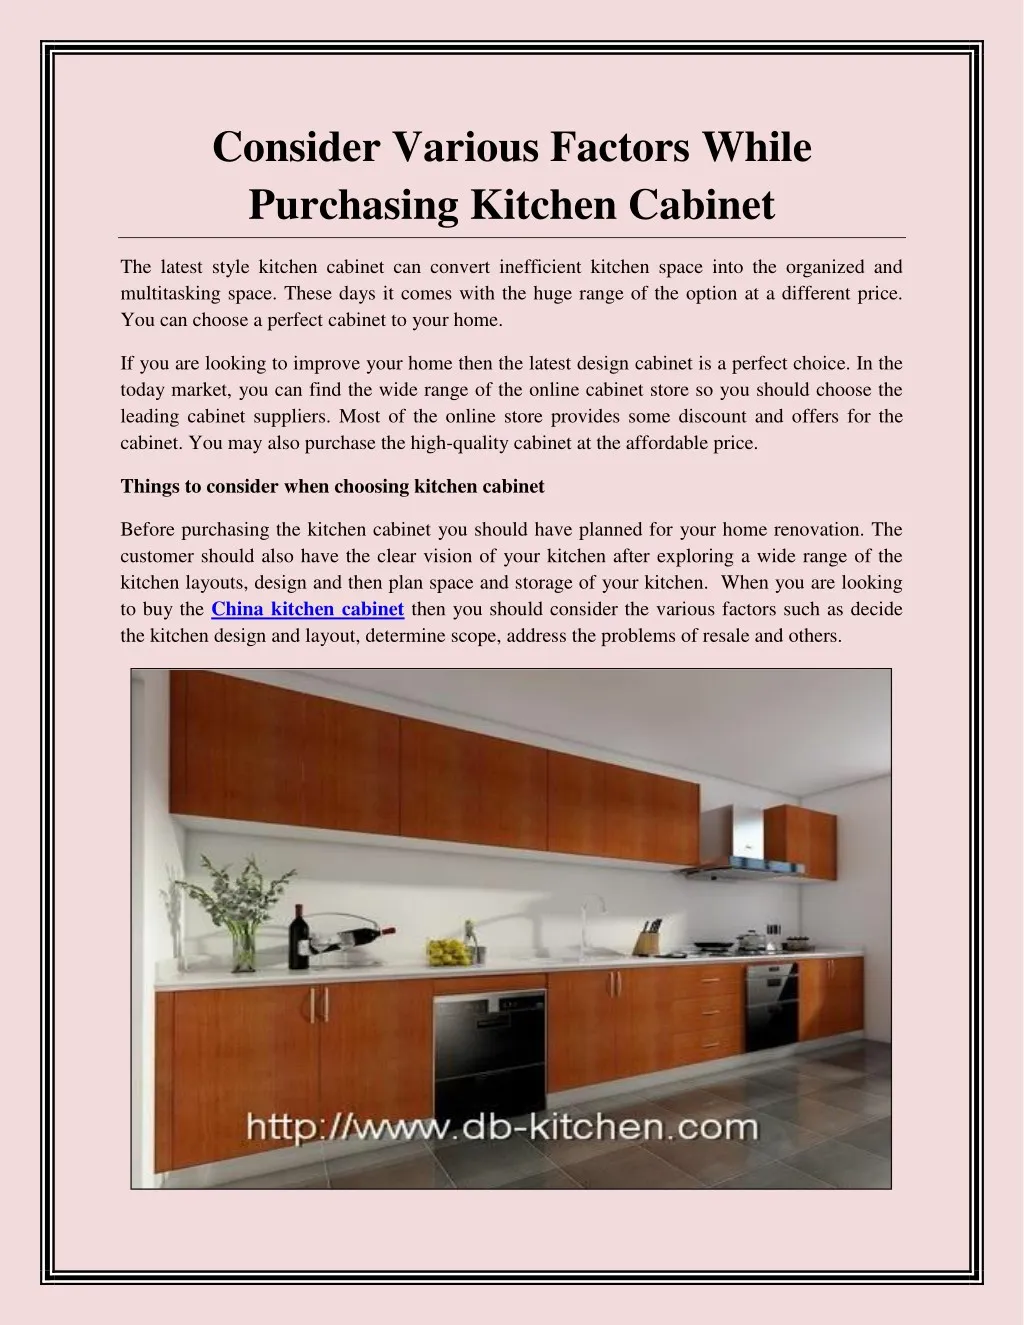 consider various factors while purchasing kitchen